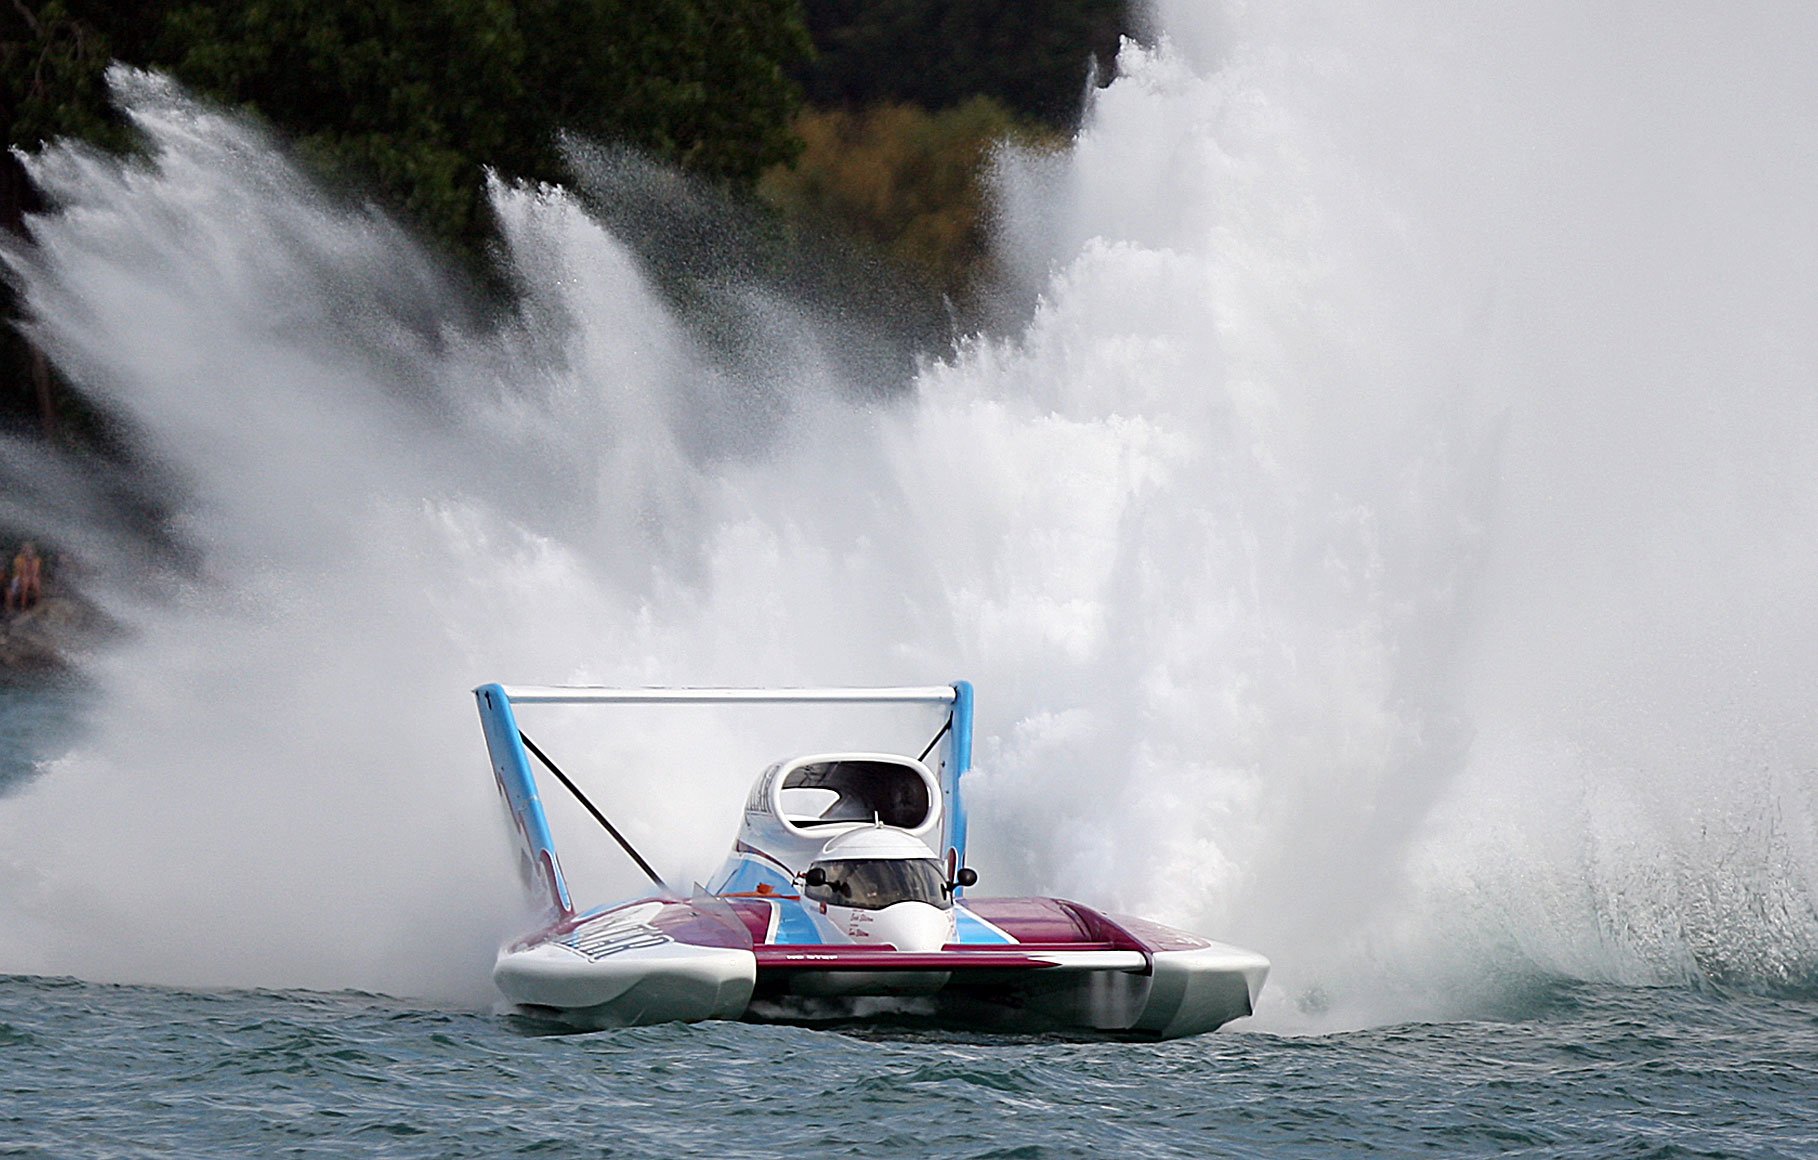 unlimited hydroplane, Race, Racing, Boat, Ship, Unlimited, Hydroplane, Jet,  8 Wallpaper